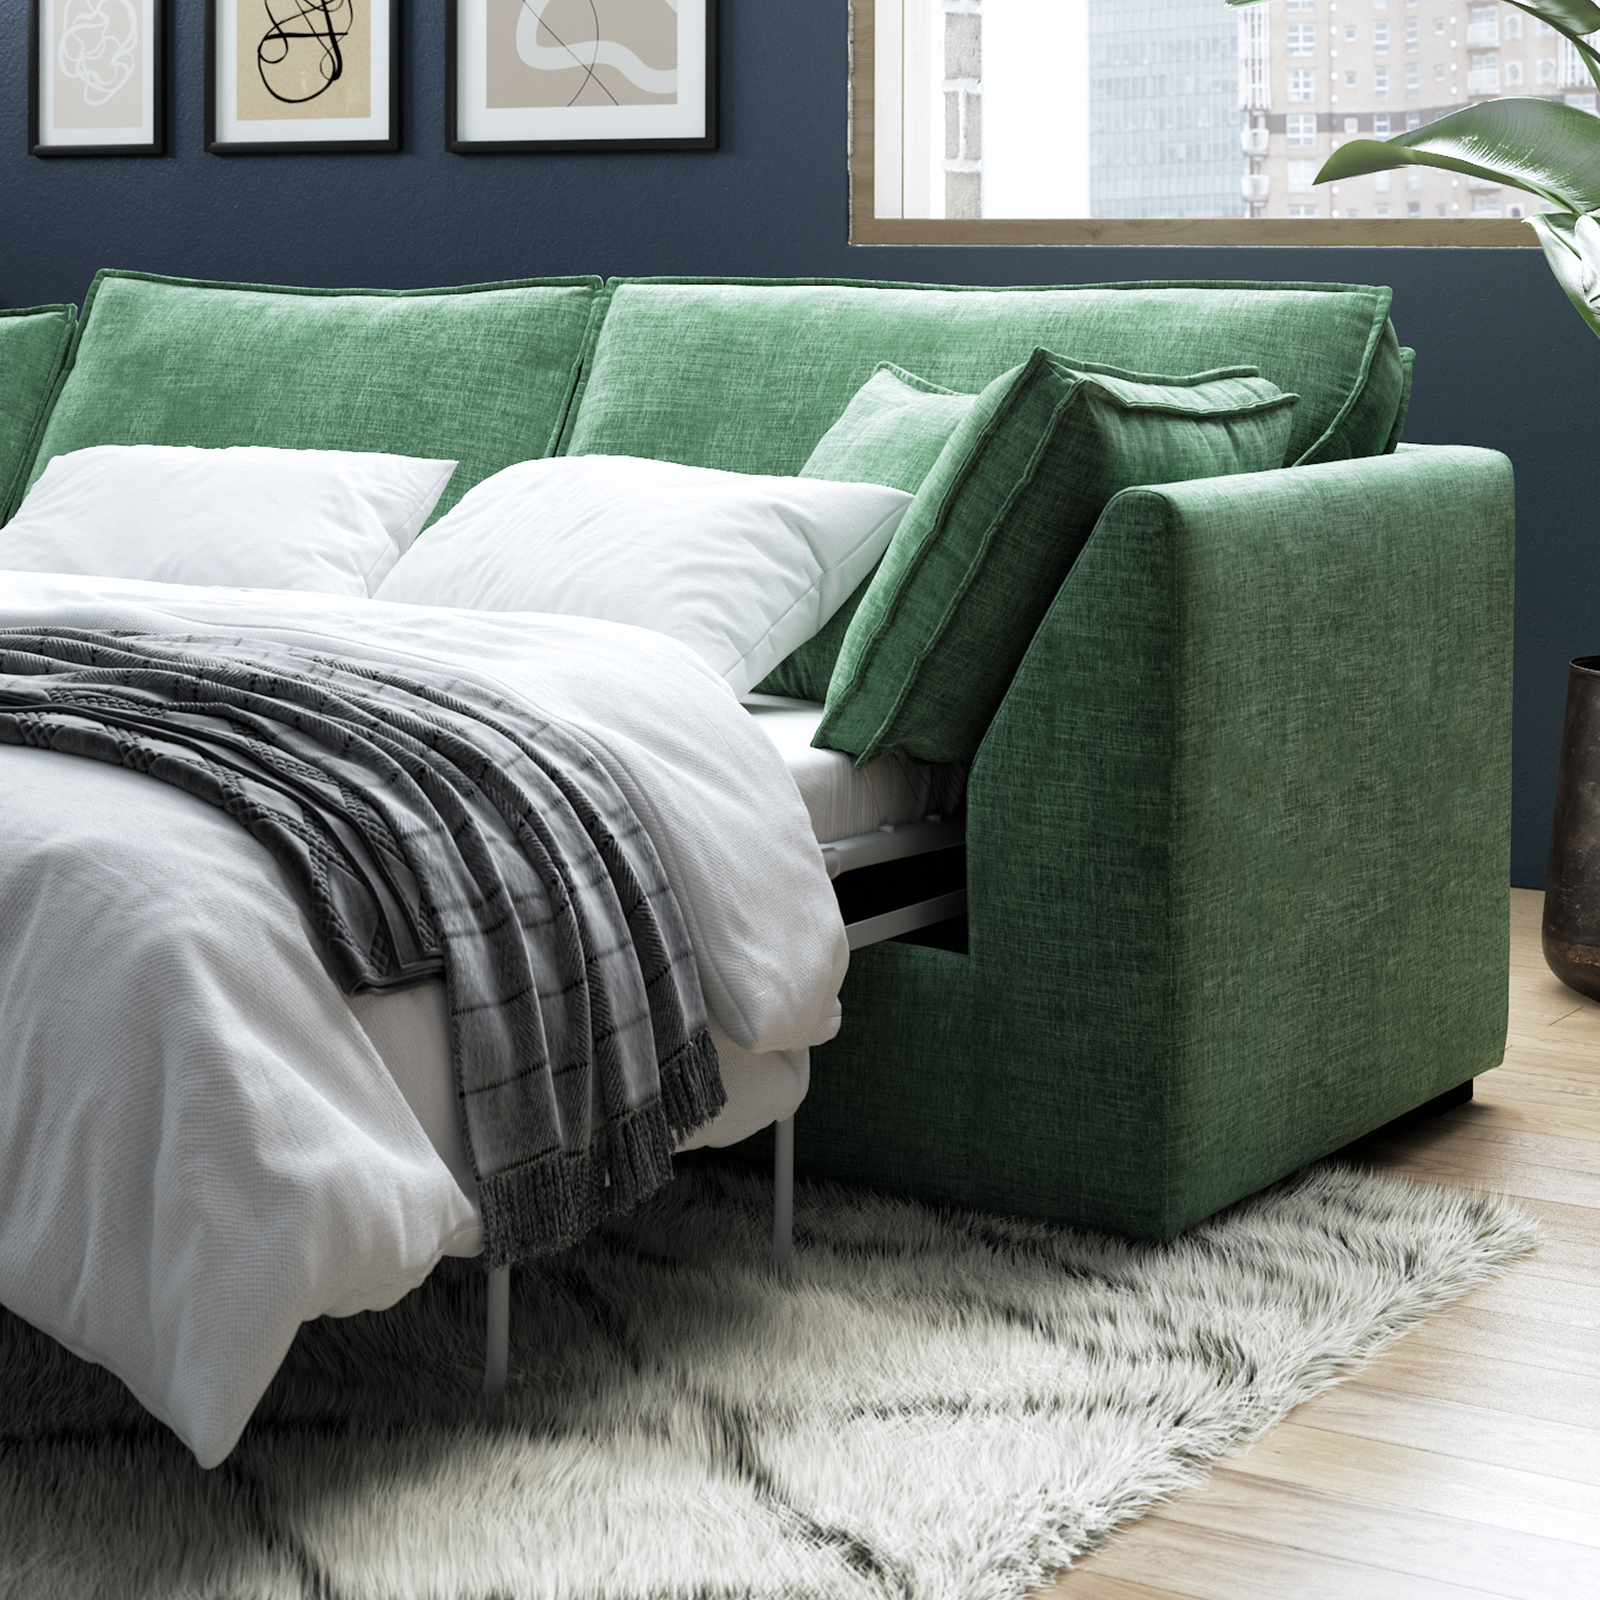 Sofa Beds Buying Guide